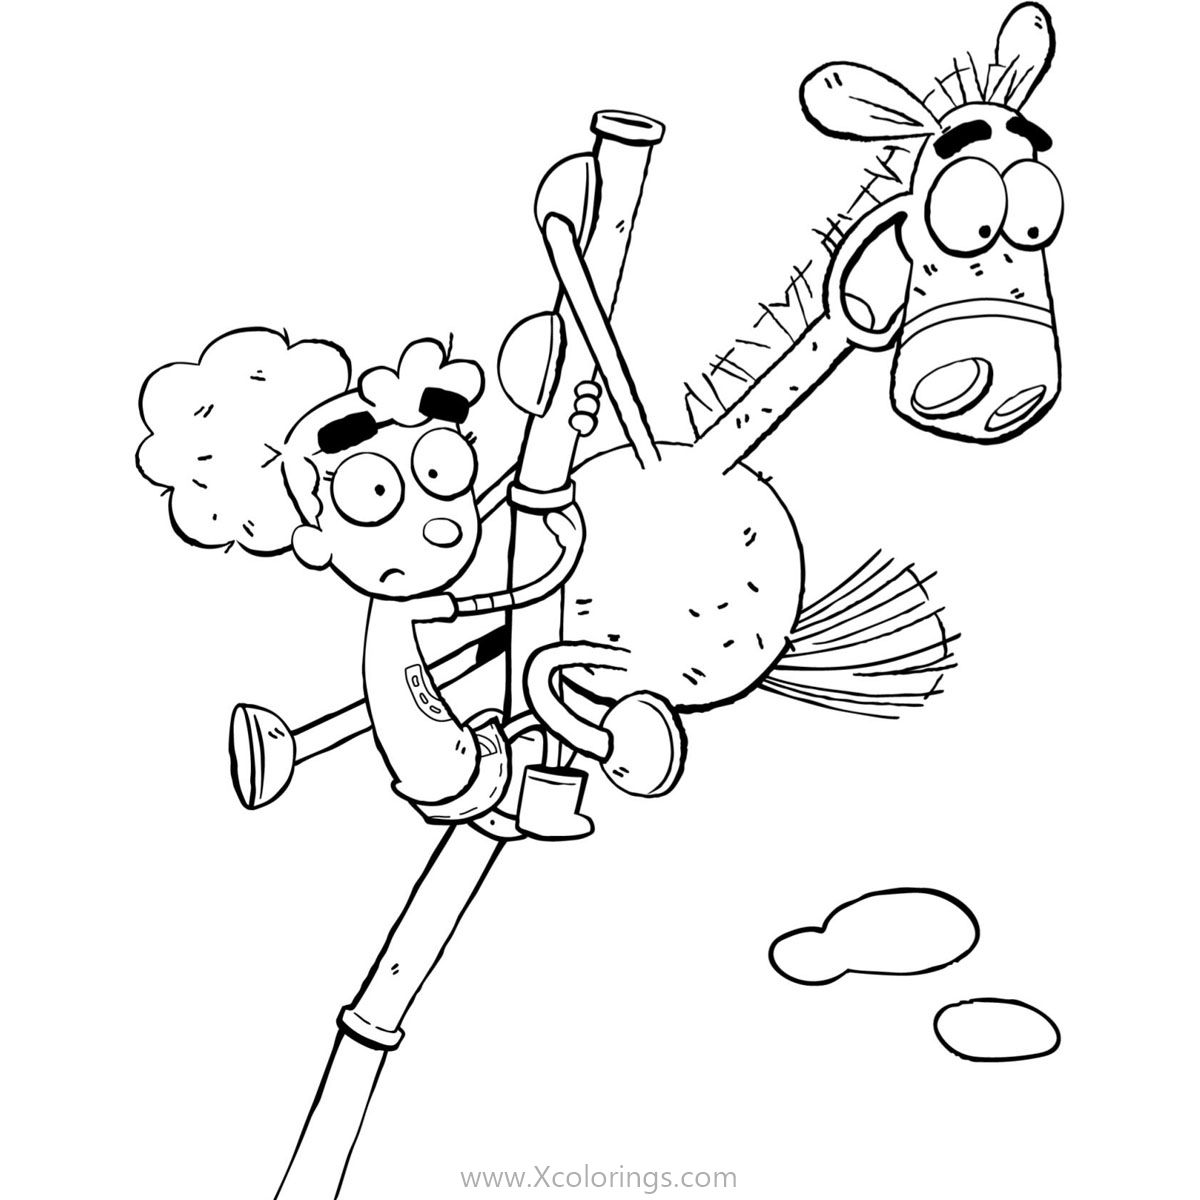 Free Free IT'S PONY Coloring Pages printable